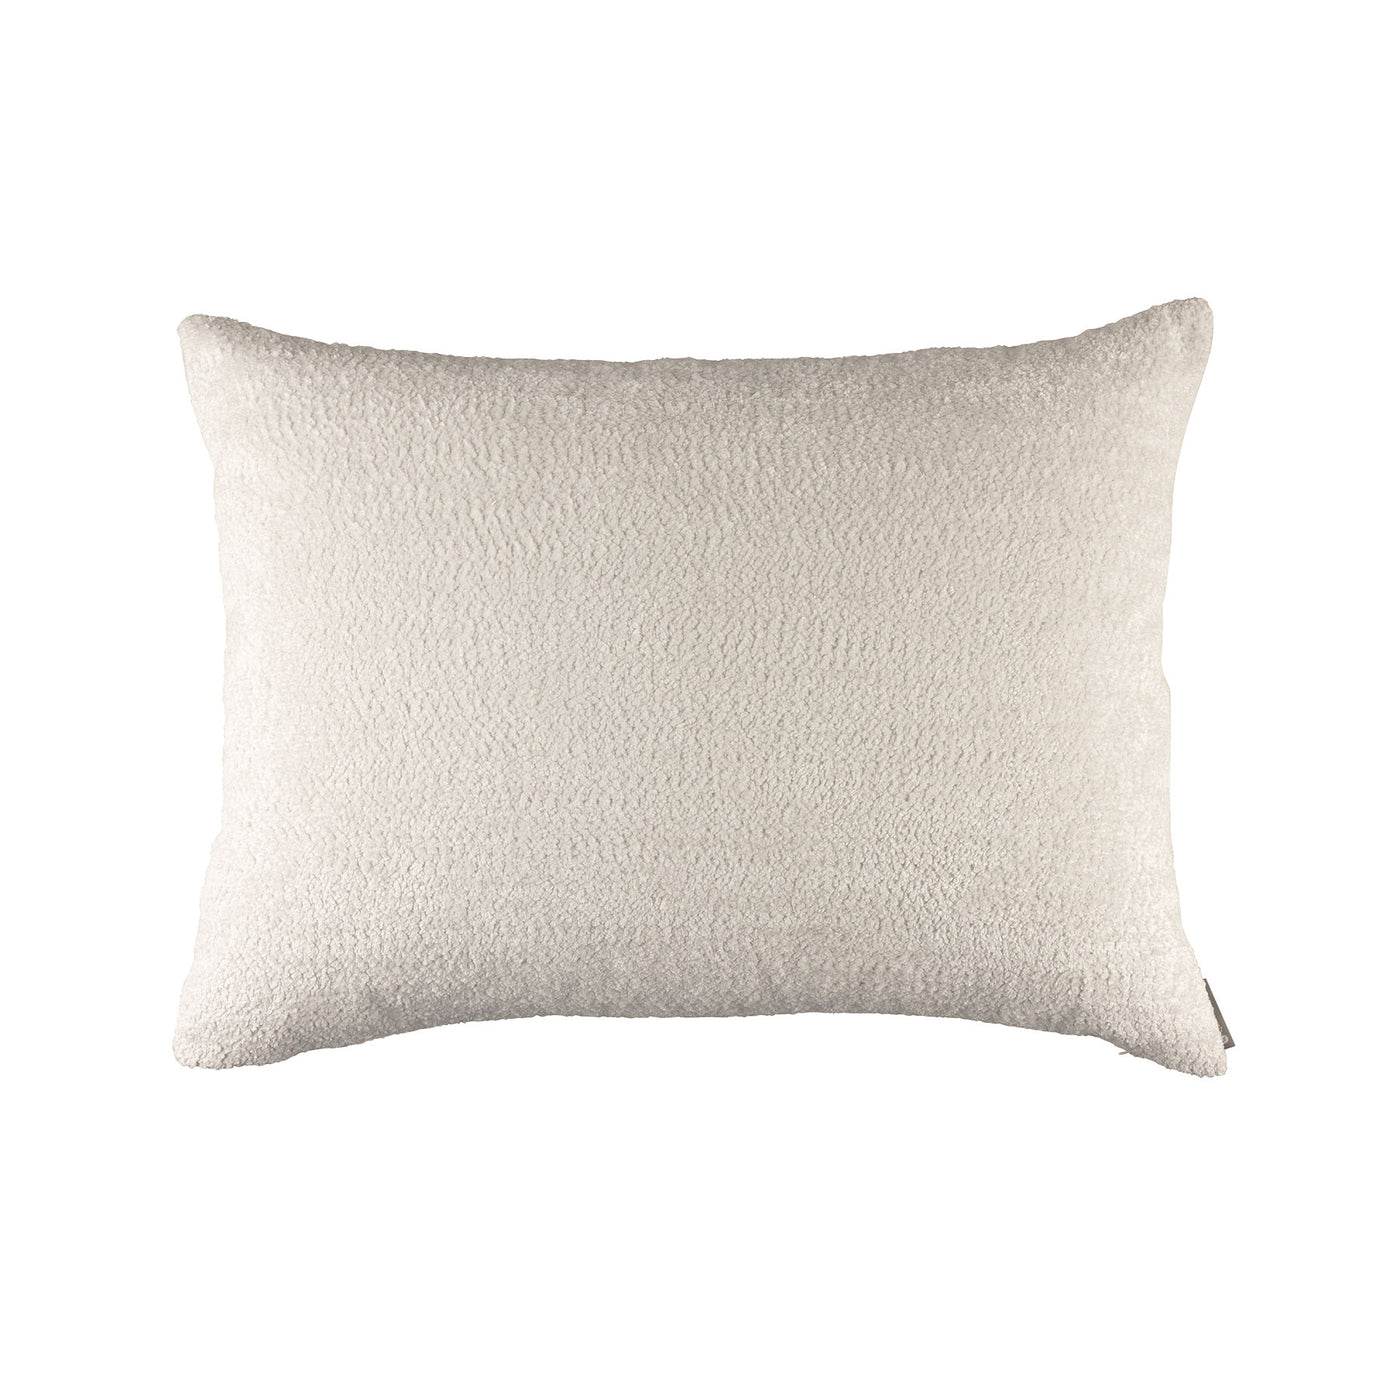 Zoey Oyster Luxe Euro Pillow (27x36)